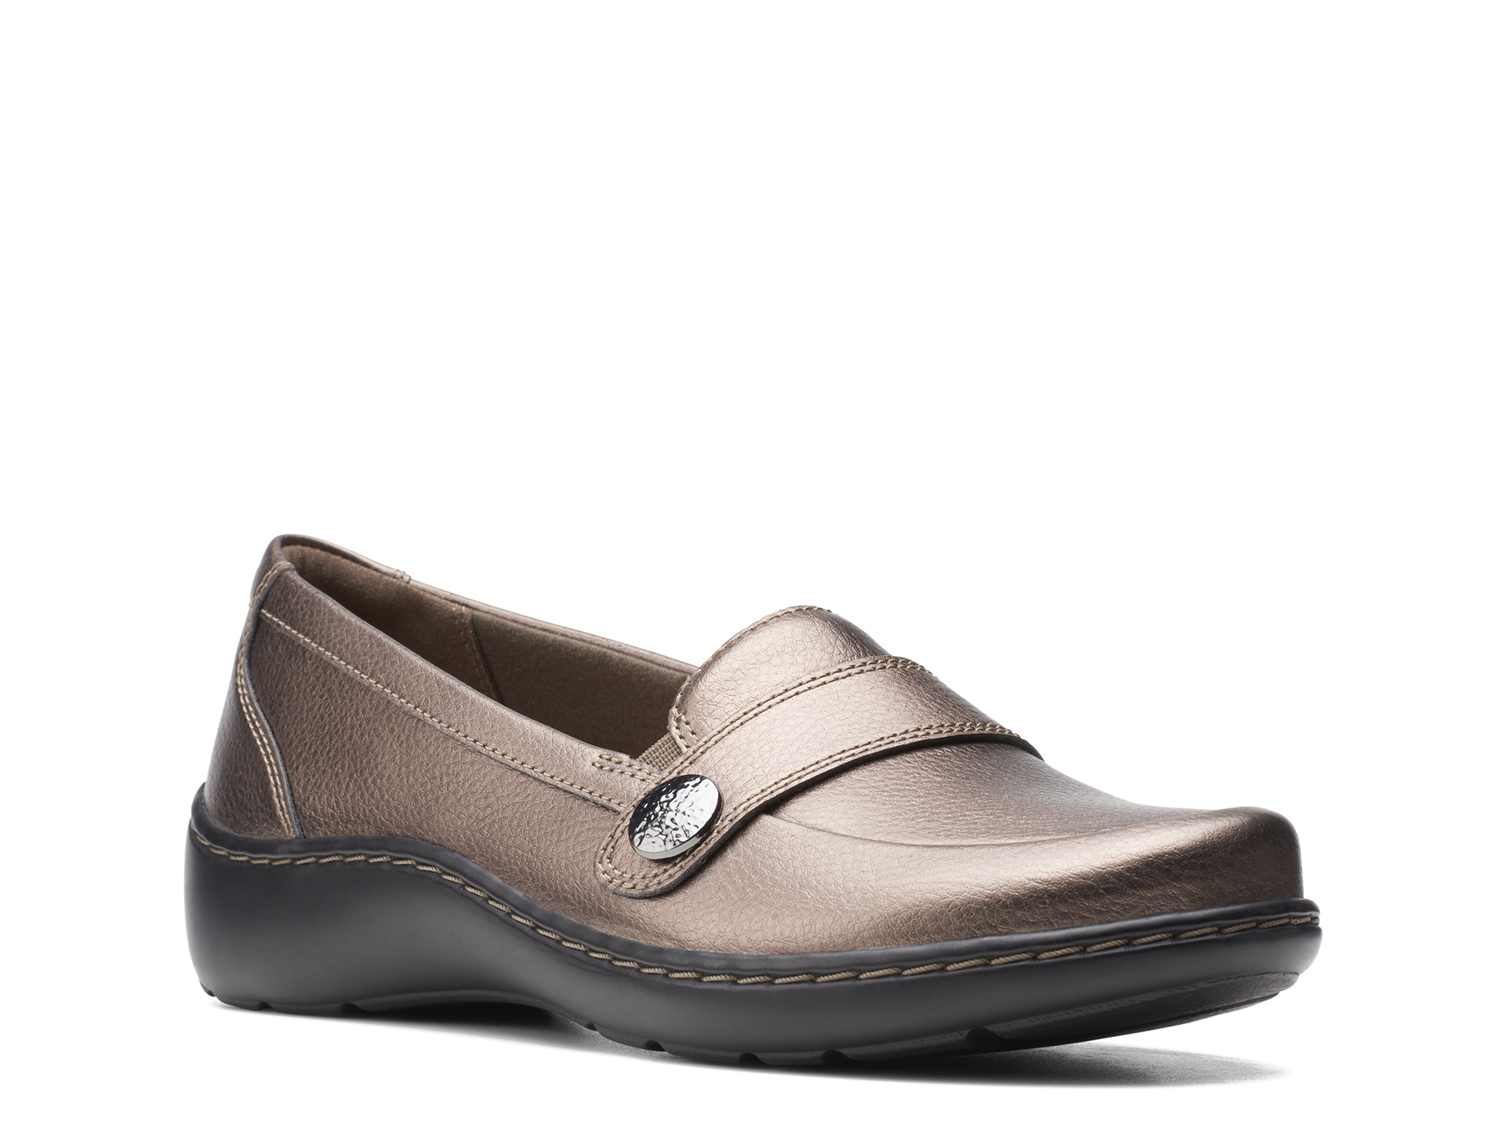 Clarks Women/'s Cora Daisy Loafer AD Template Size